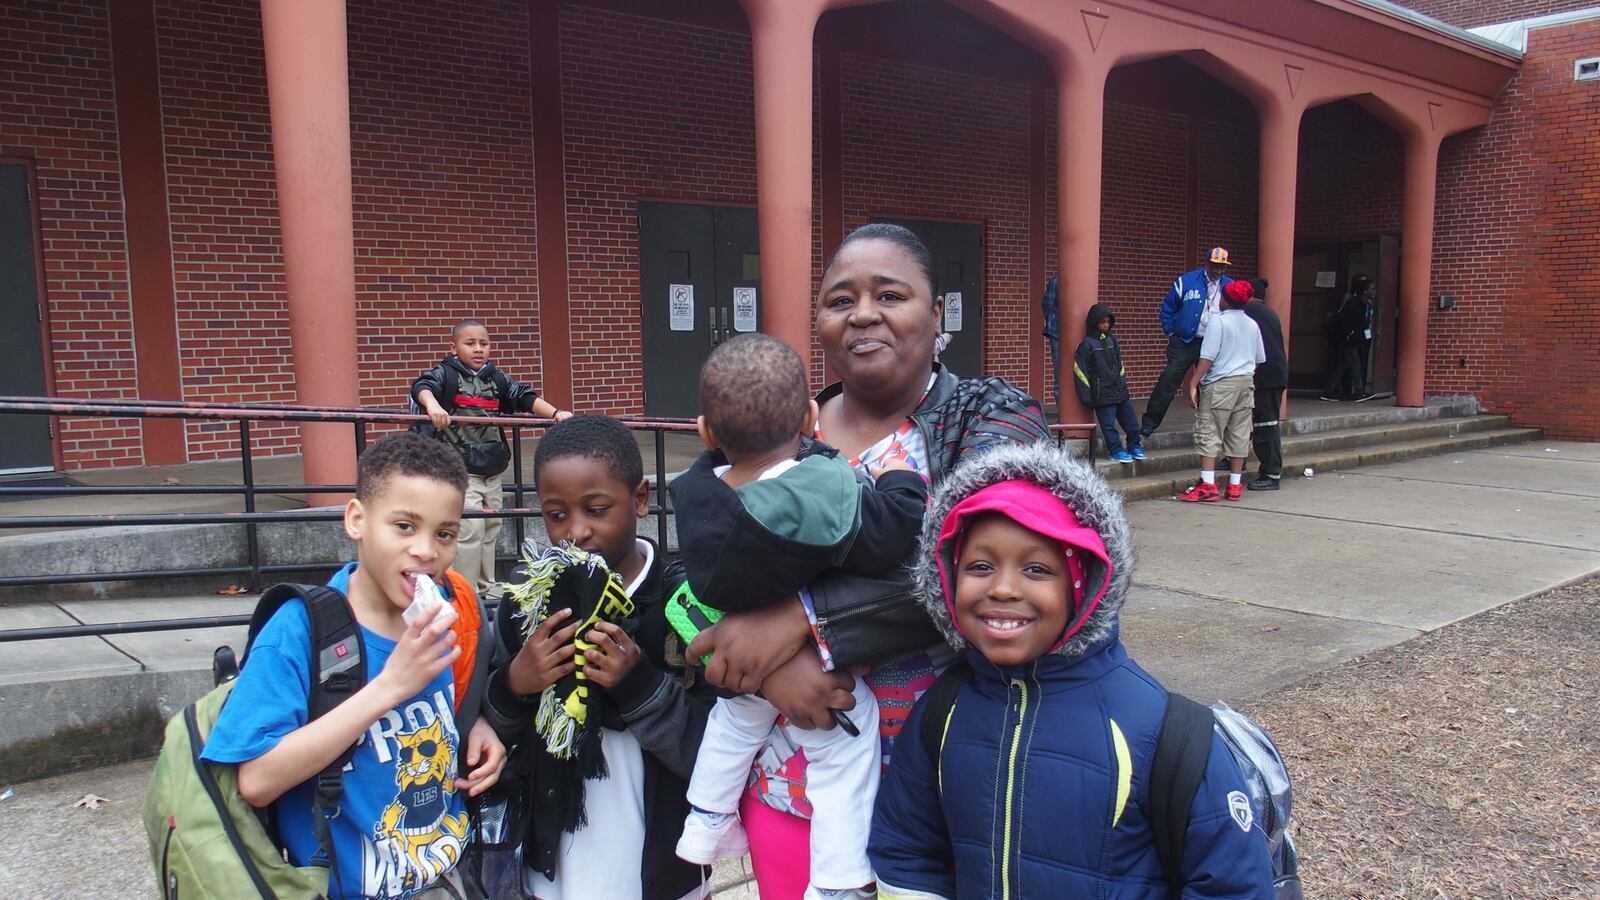 Anita Smith stands with grandson Jaylan Jones (second from left) and his friends in front of Lincoln Elementary School during its last months of operation in 2015. Shelby County Schools is tracking the academic performance of displaced Lincoln students who now attend A.B. Hill Elementary.